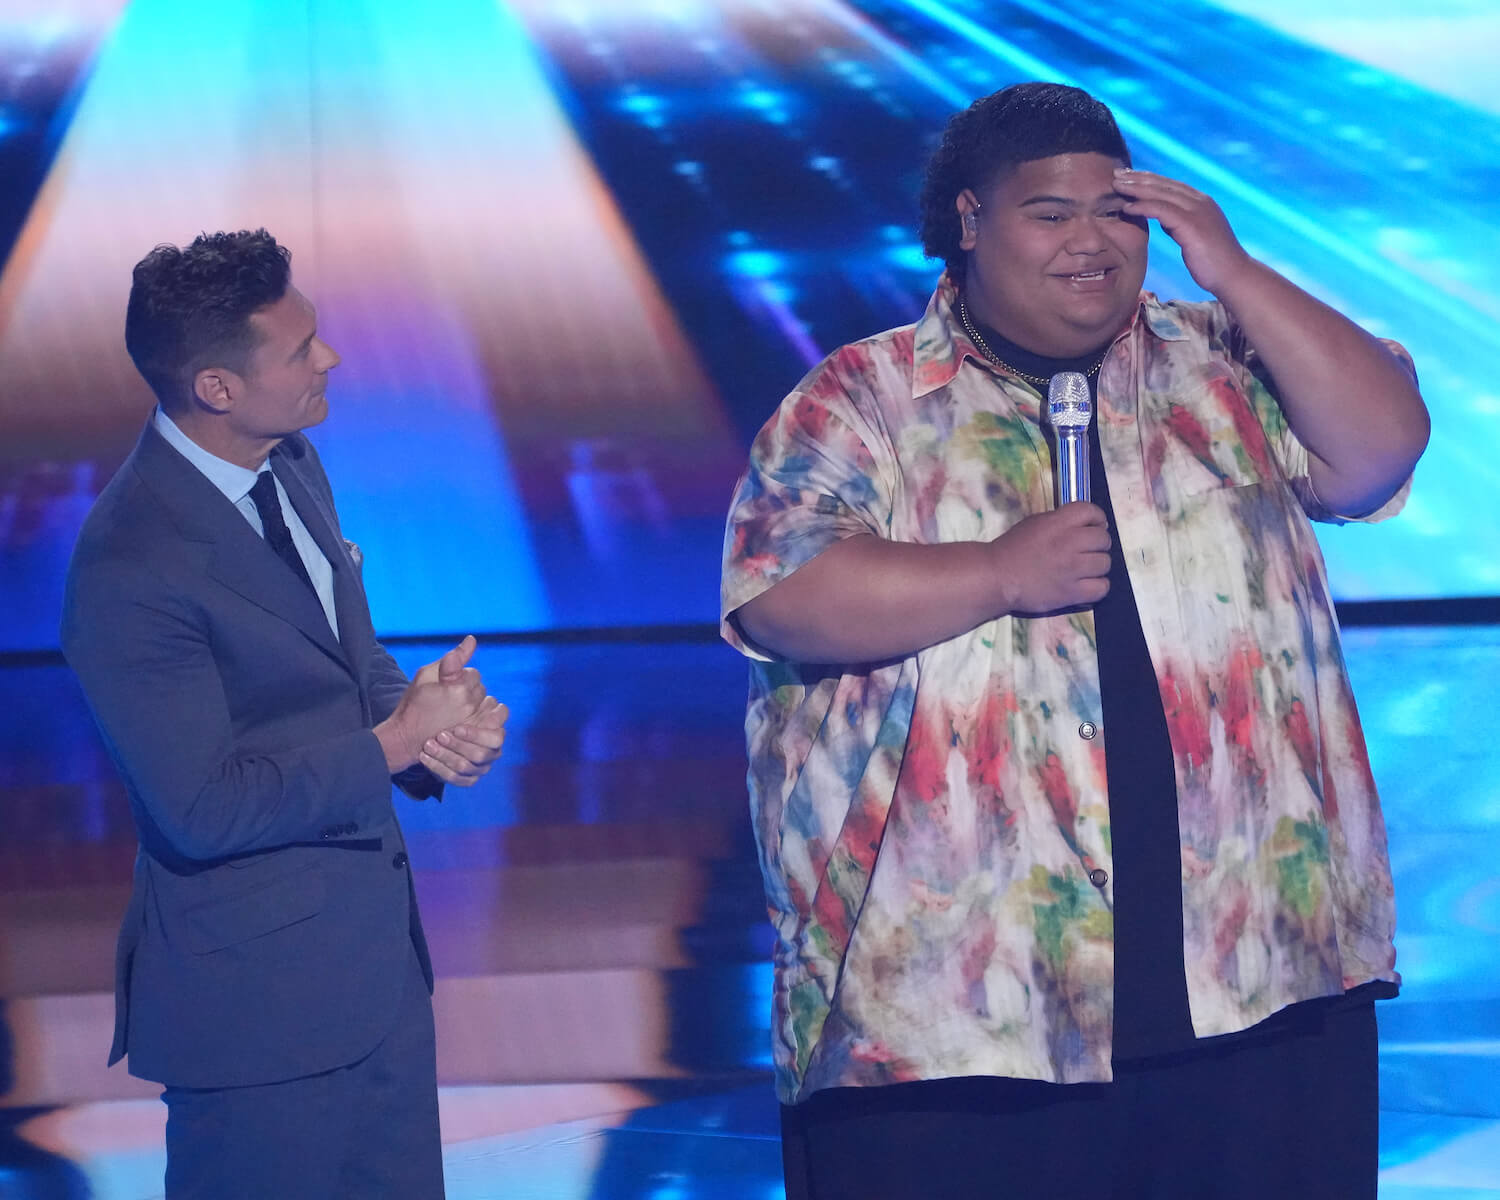 Iam Tongi with Ryan Seacrest on stage. Iam made it into the 'American Idol' 2023 Judges Song Contest